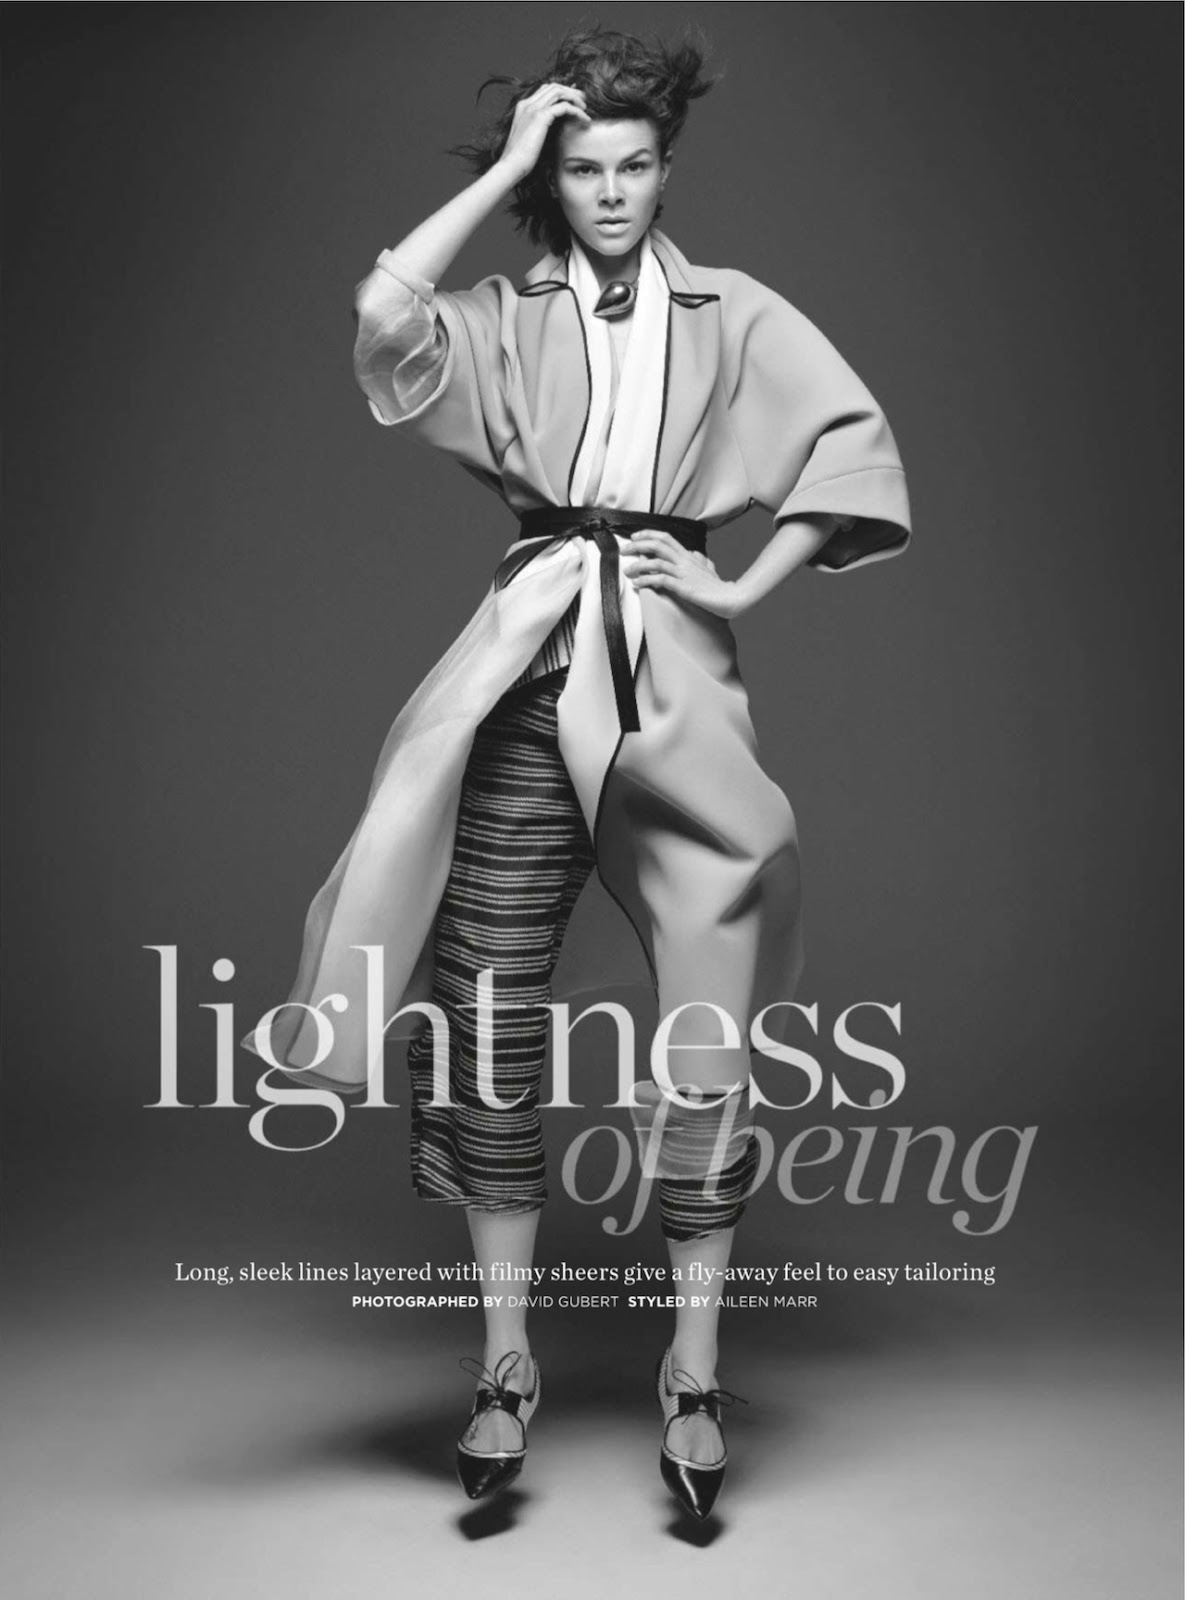 lightness of being: ruby jean wilson by david gubert for marie claire ...